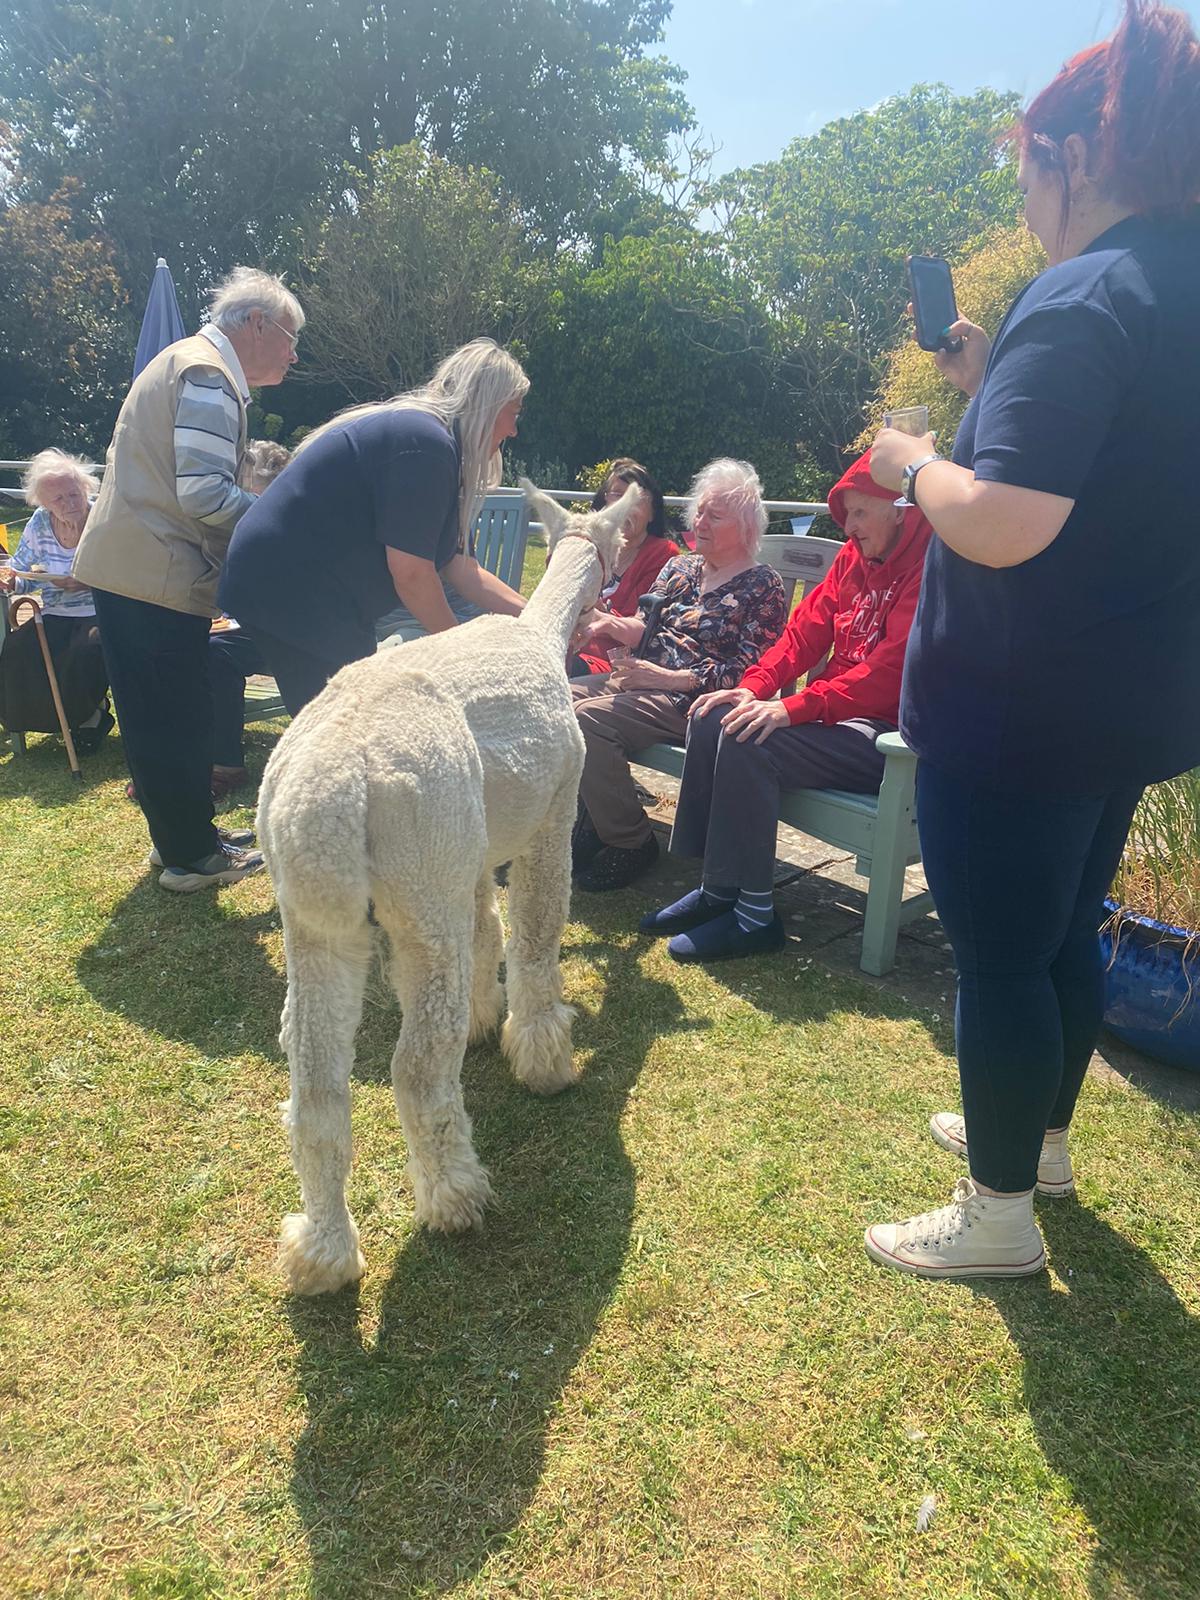 The residents interacting with the alpacas